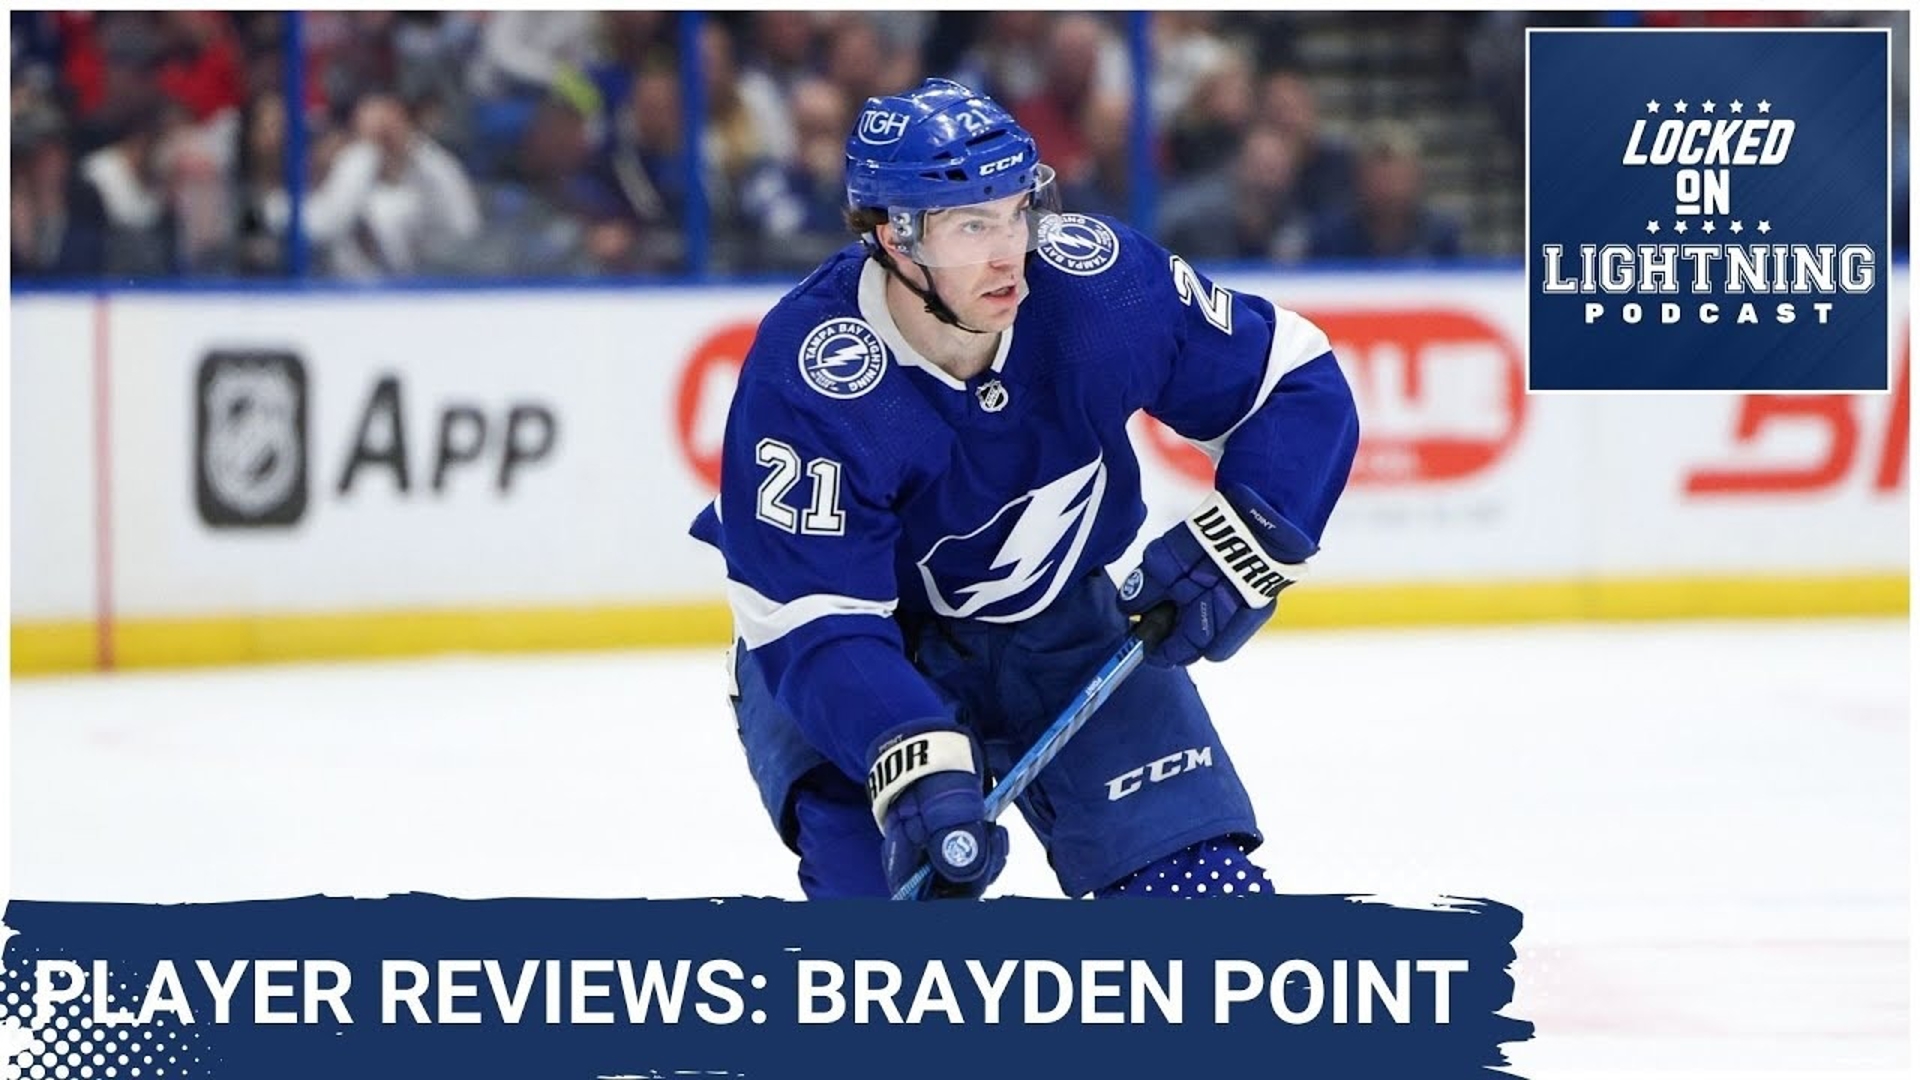 Brayden Point followed up his previous 50-goal season by notching 46 goals in his 2023-24 campaign.